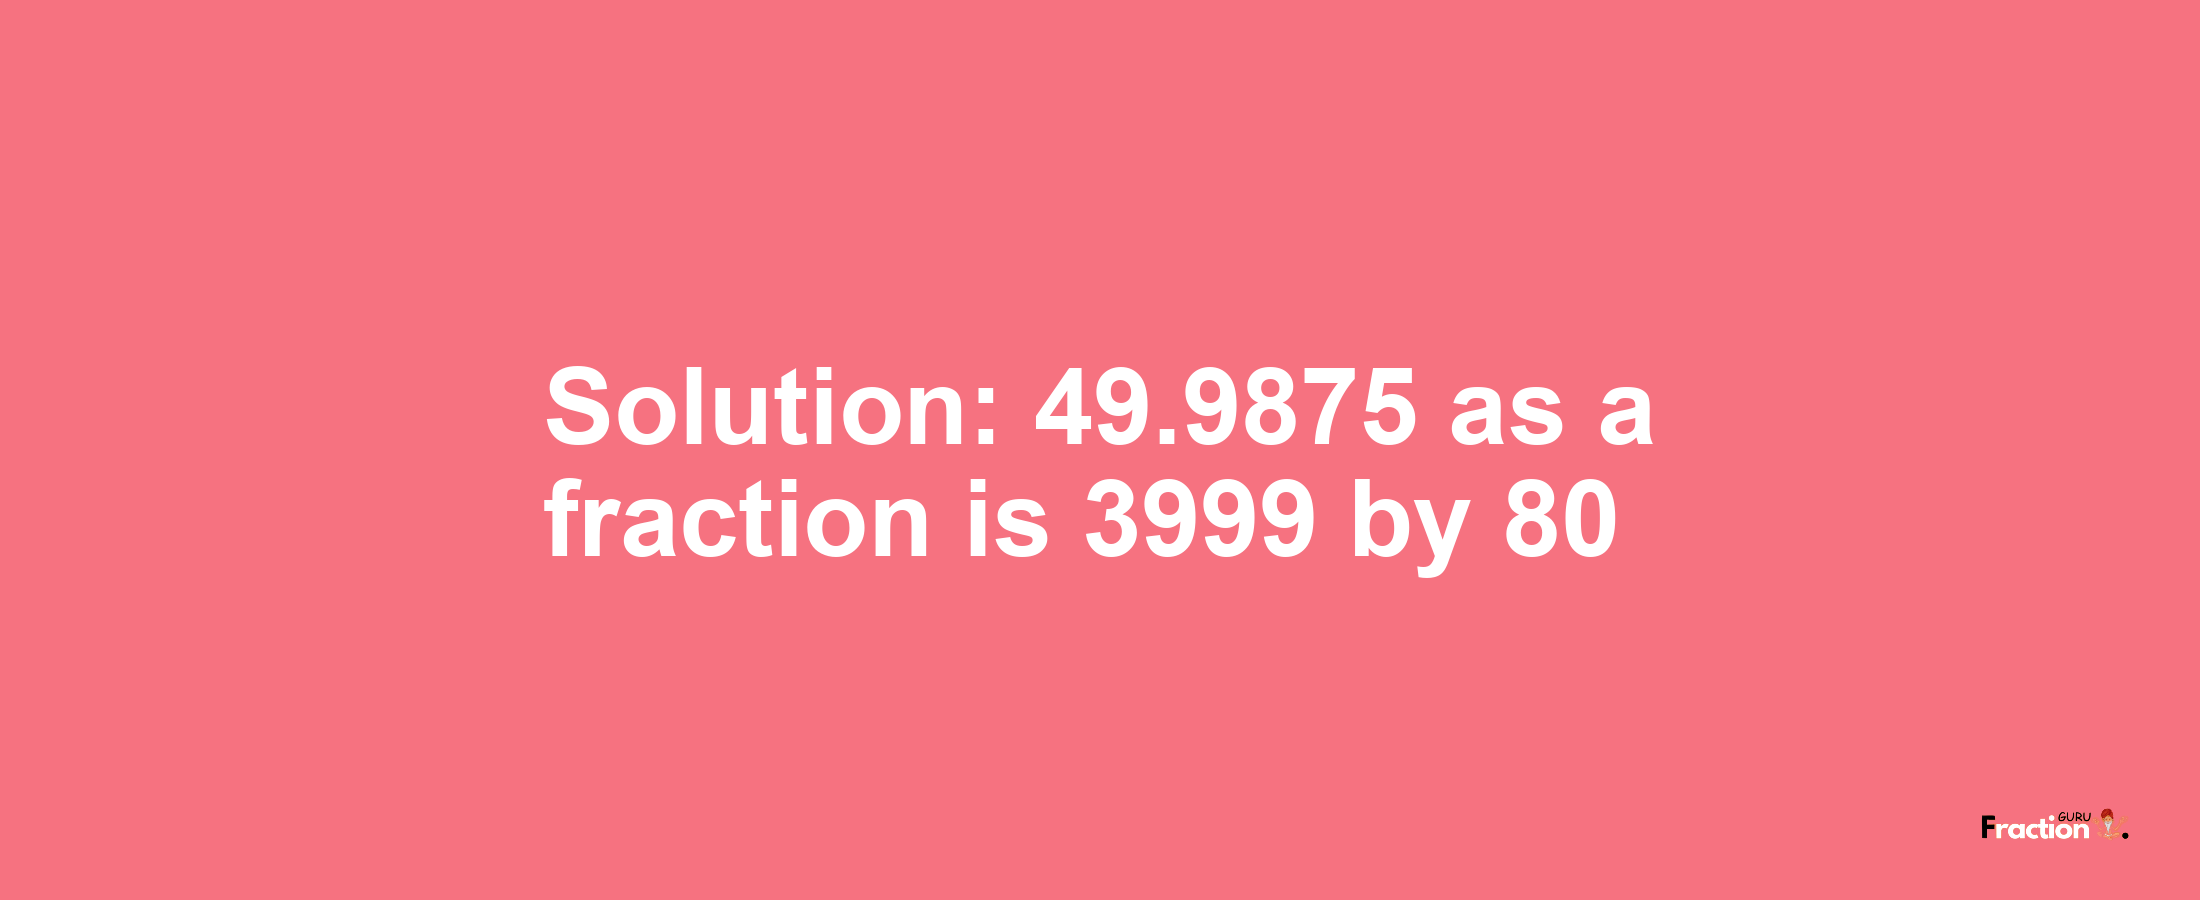 Solution:49.9875 as a fraction is 3999/80